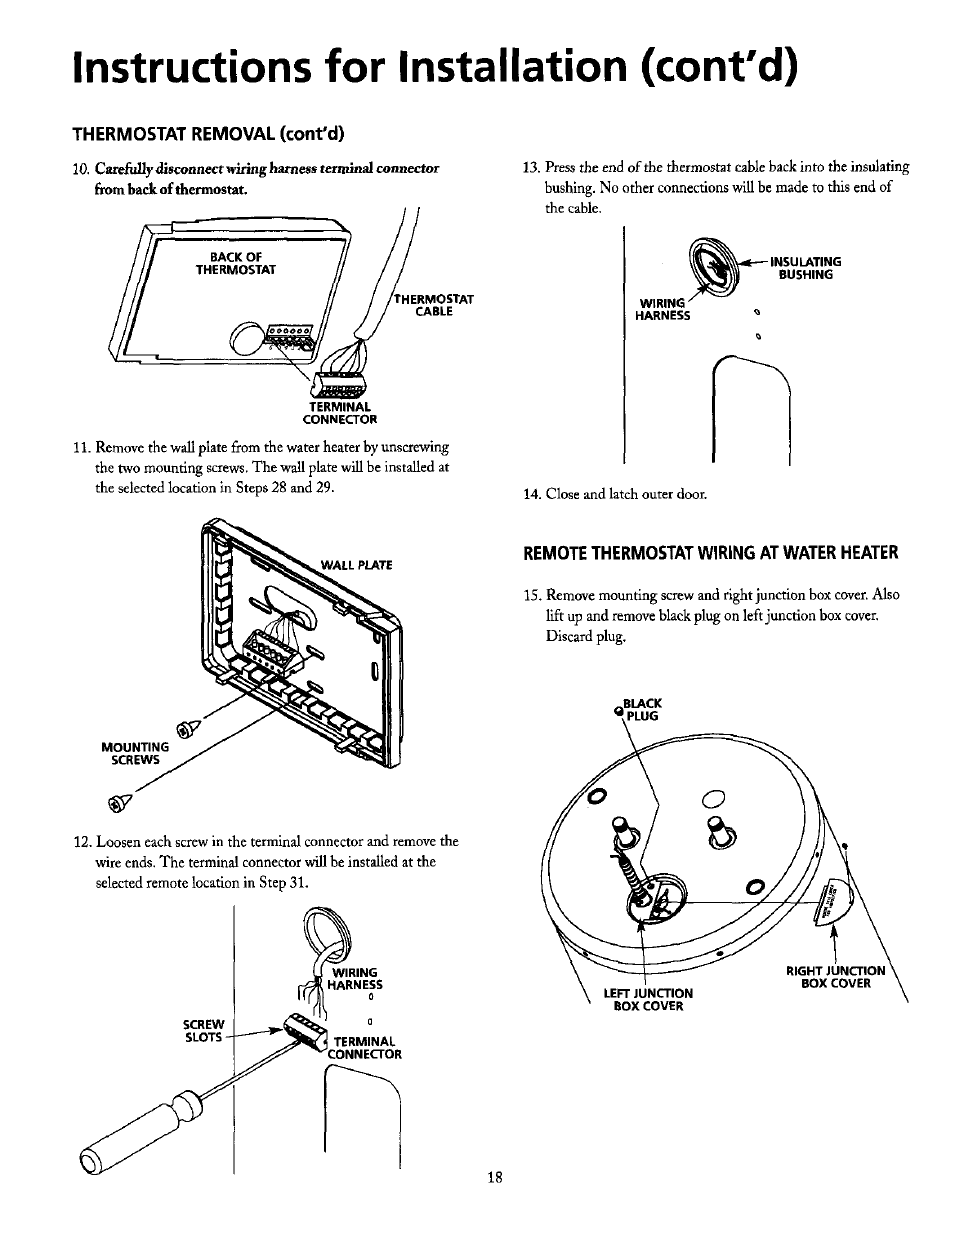 Instructions for installation (cont'd) | Maytag HE21250PC User Manual | Page 18 / 40